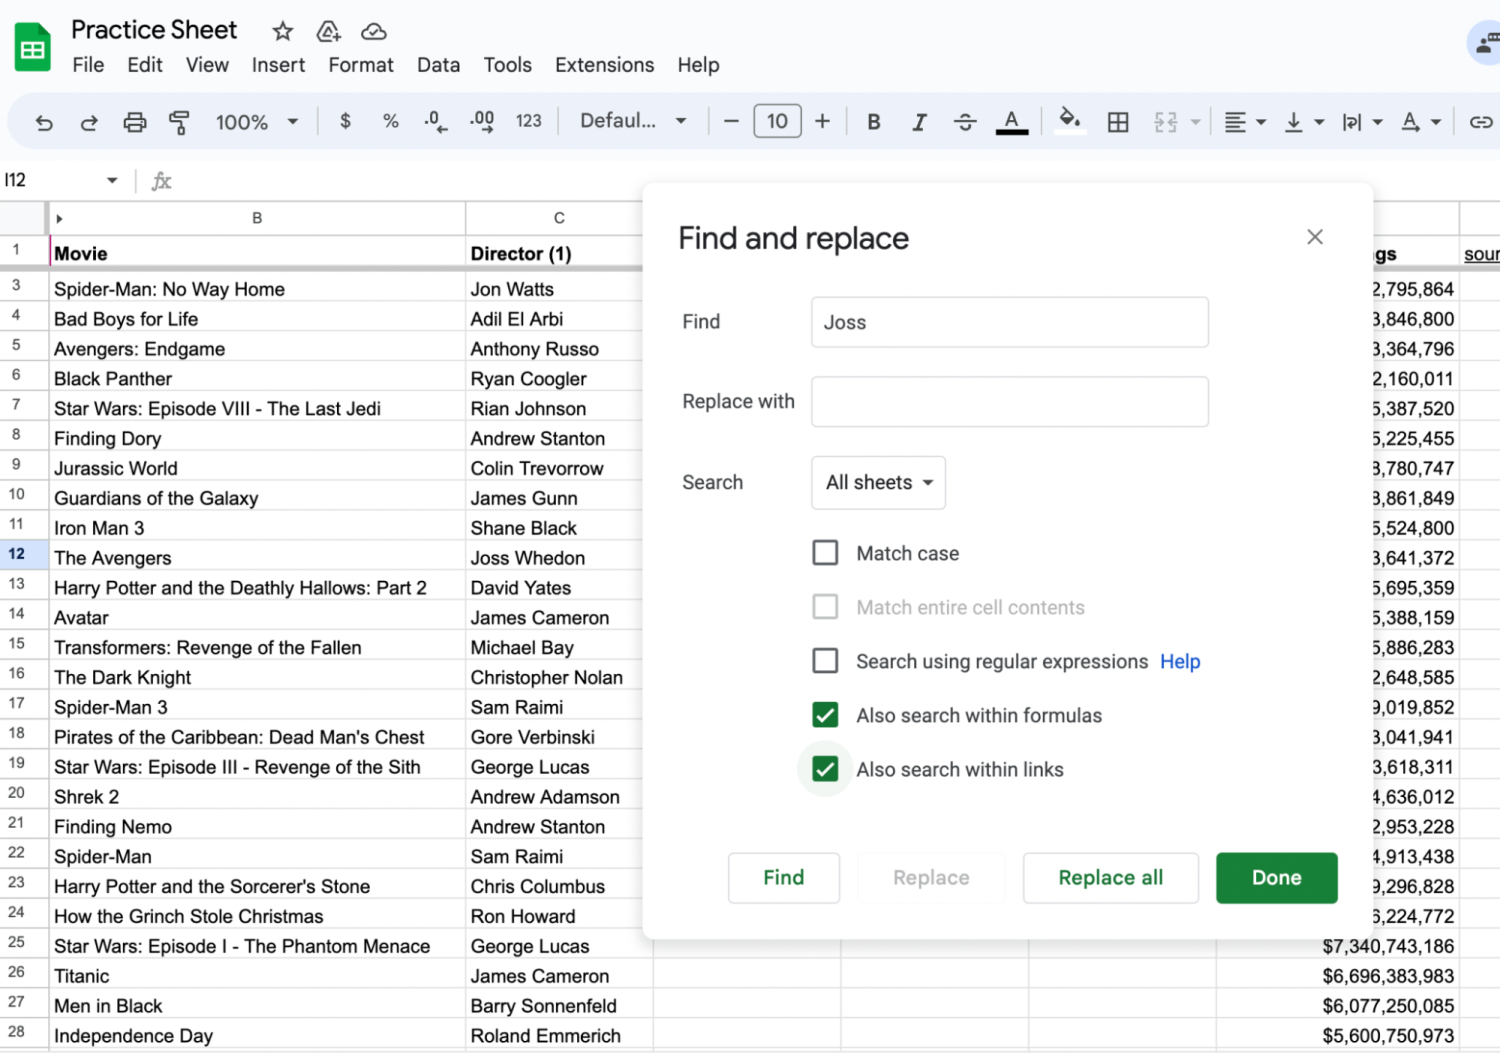 [Screenshot] Screenshot of the ‘Find and replace’ box in Google Sheets displayed with the ‘Also search within formulas’ and ‘Also search within links’ boxes checked